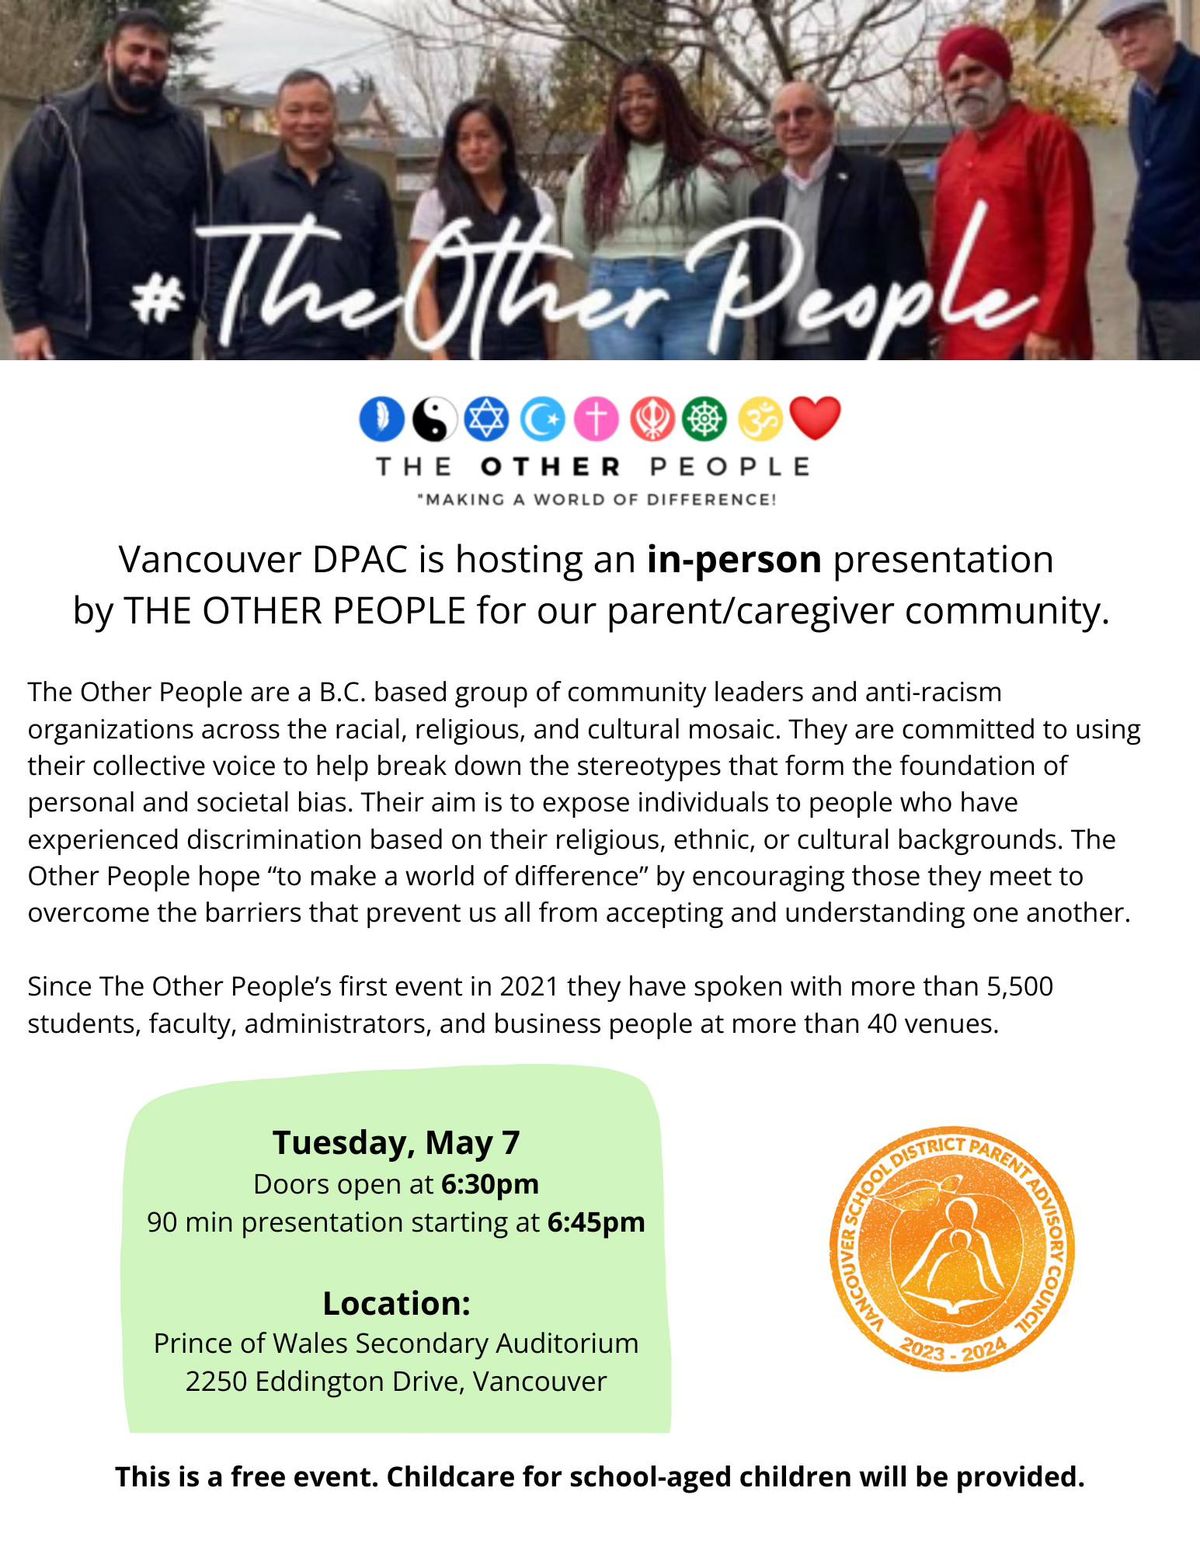 Vancouver DPAC parent education event: The Other People